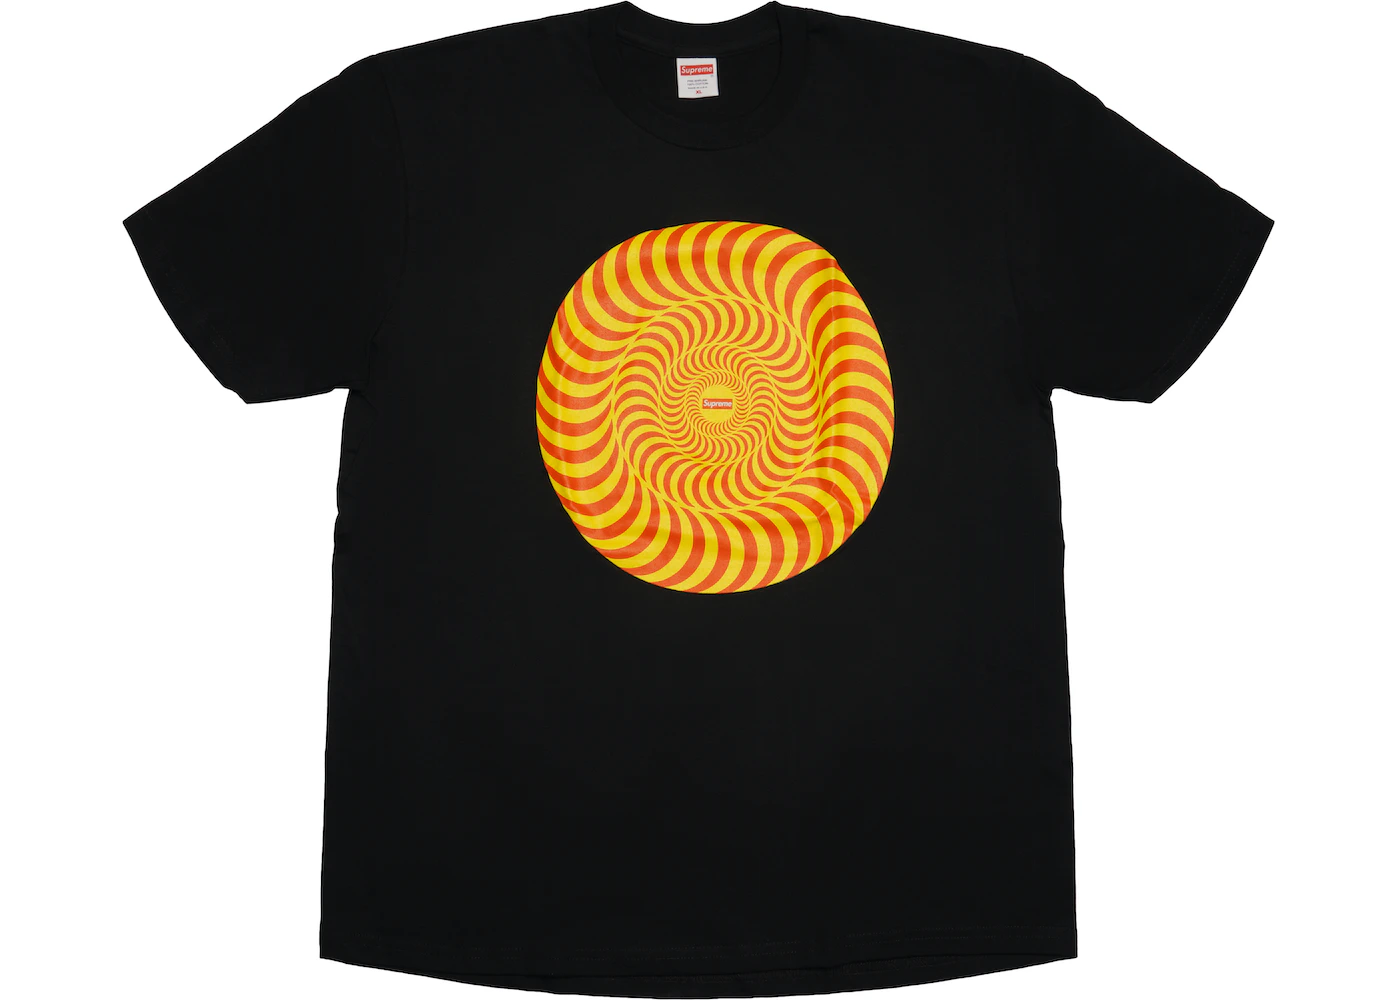 Lil other Passerby Supreme Spitfire Classic Swirl T-Shirt Black - SS18 Men's - US